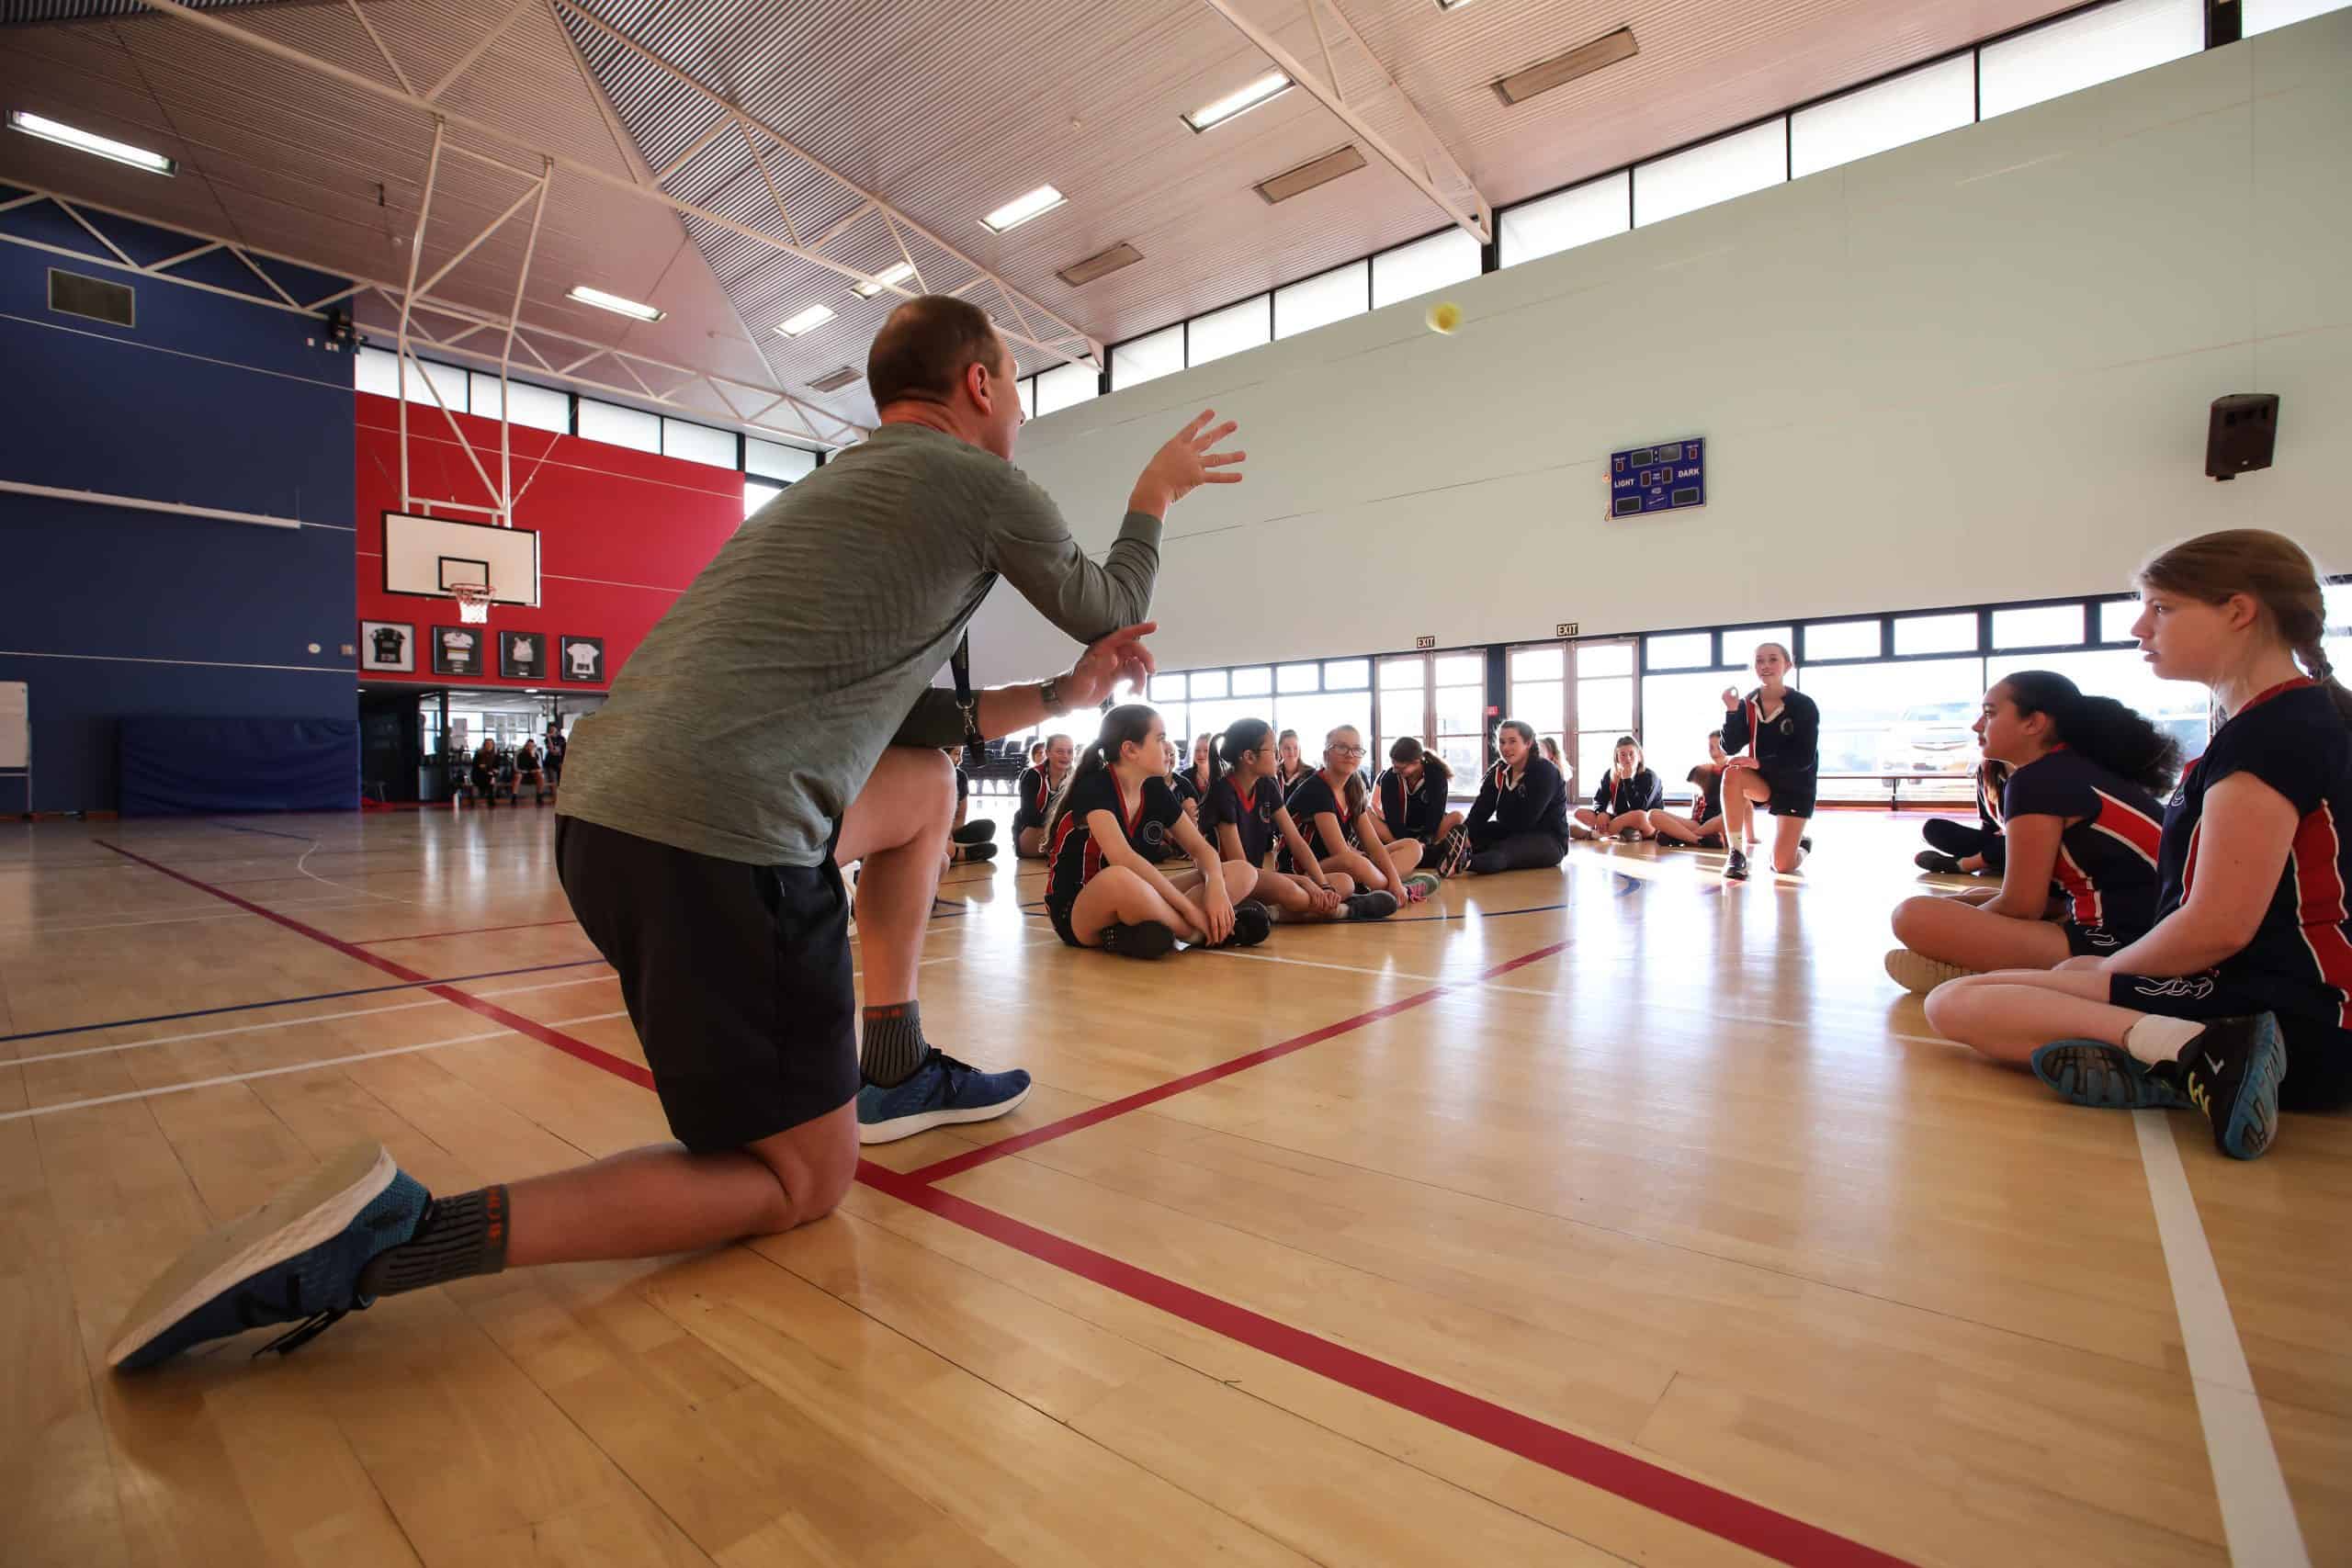 Teacher demonstrating a ball throwing technique to female students in a school gymnasium